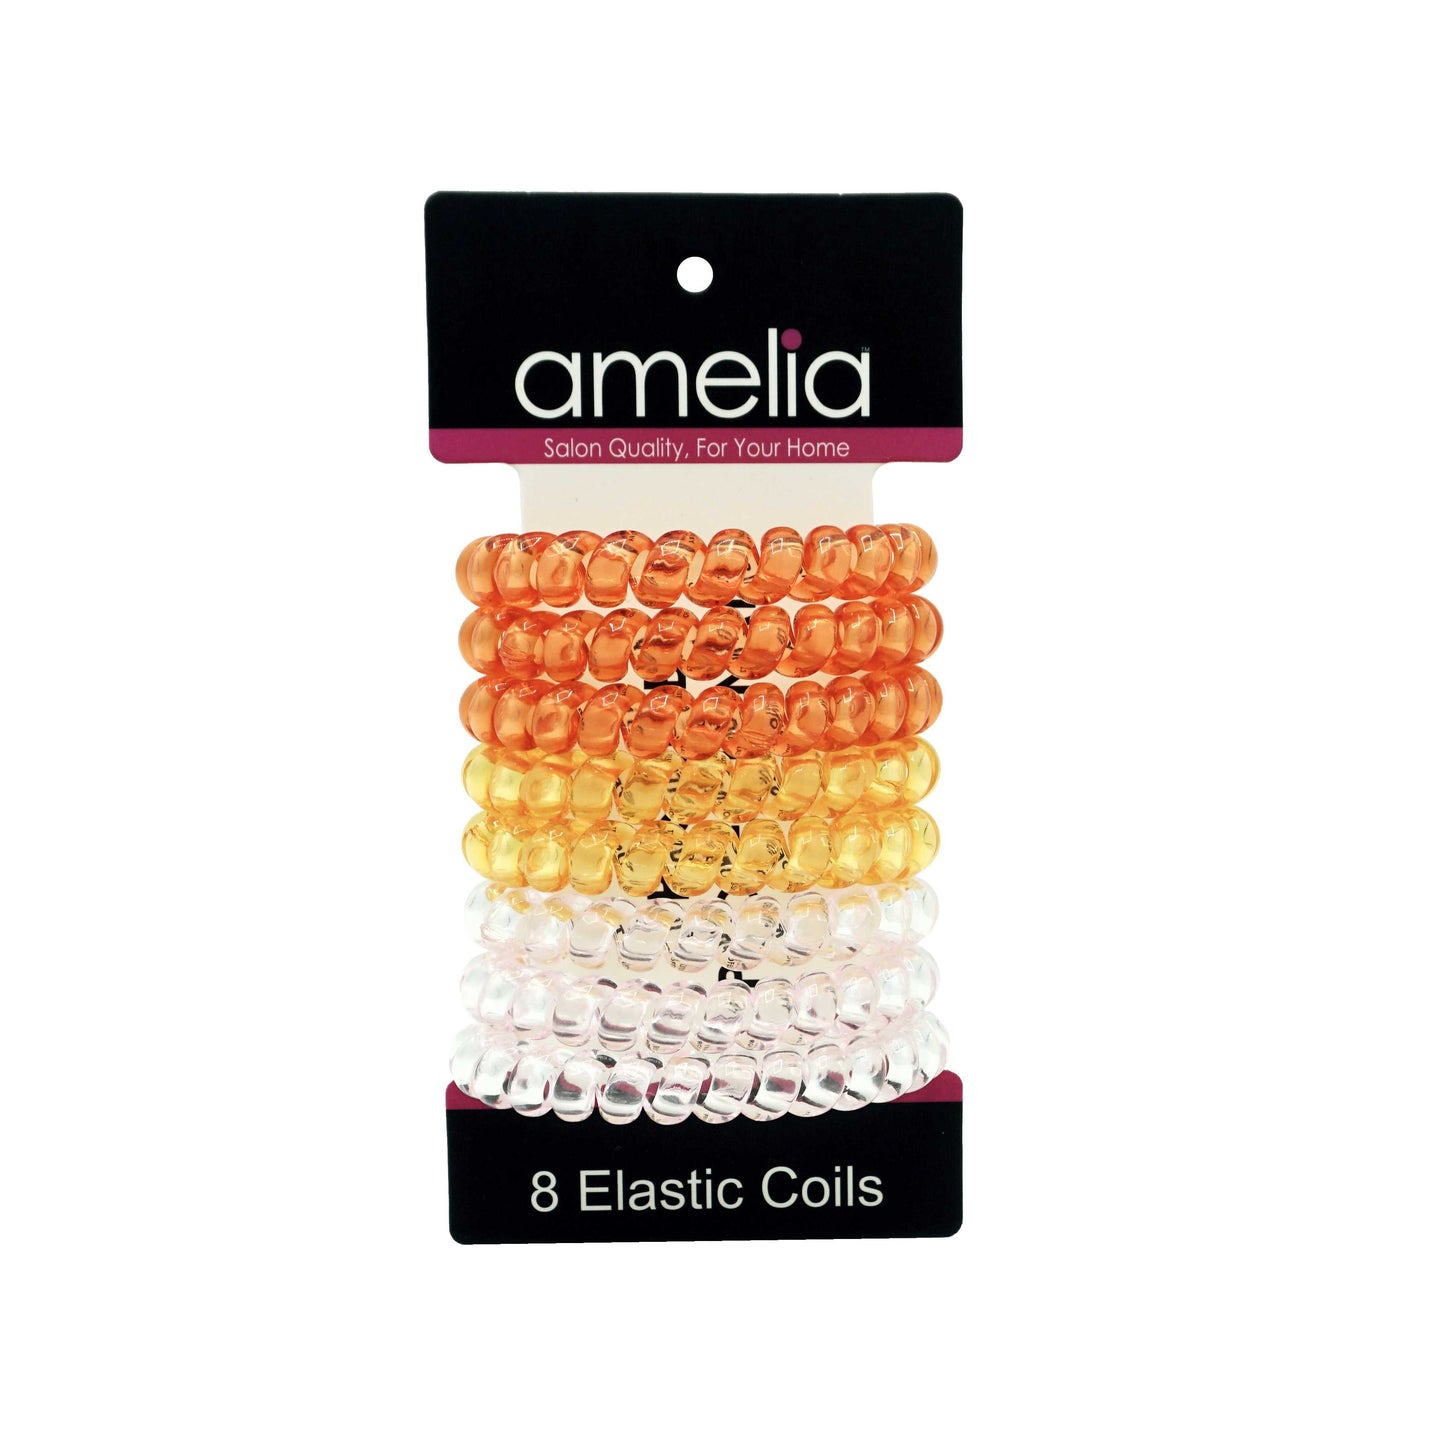 Amelia Beauty Products 8 Large Smooth Shiny Center Elastic Hair Coils, 2. 5in Diameter Thick Spiral Hair Ties, Gentle on Hair, Strong Hold and Minimizes Dents and Creases, Pink, Yellow and Orange Mix